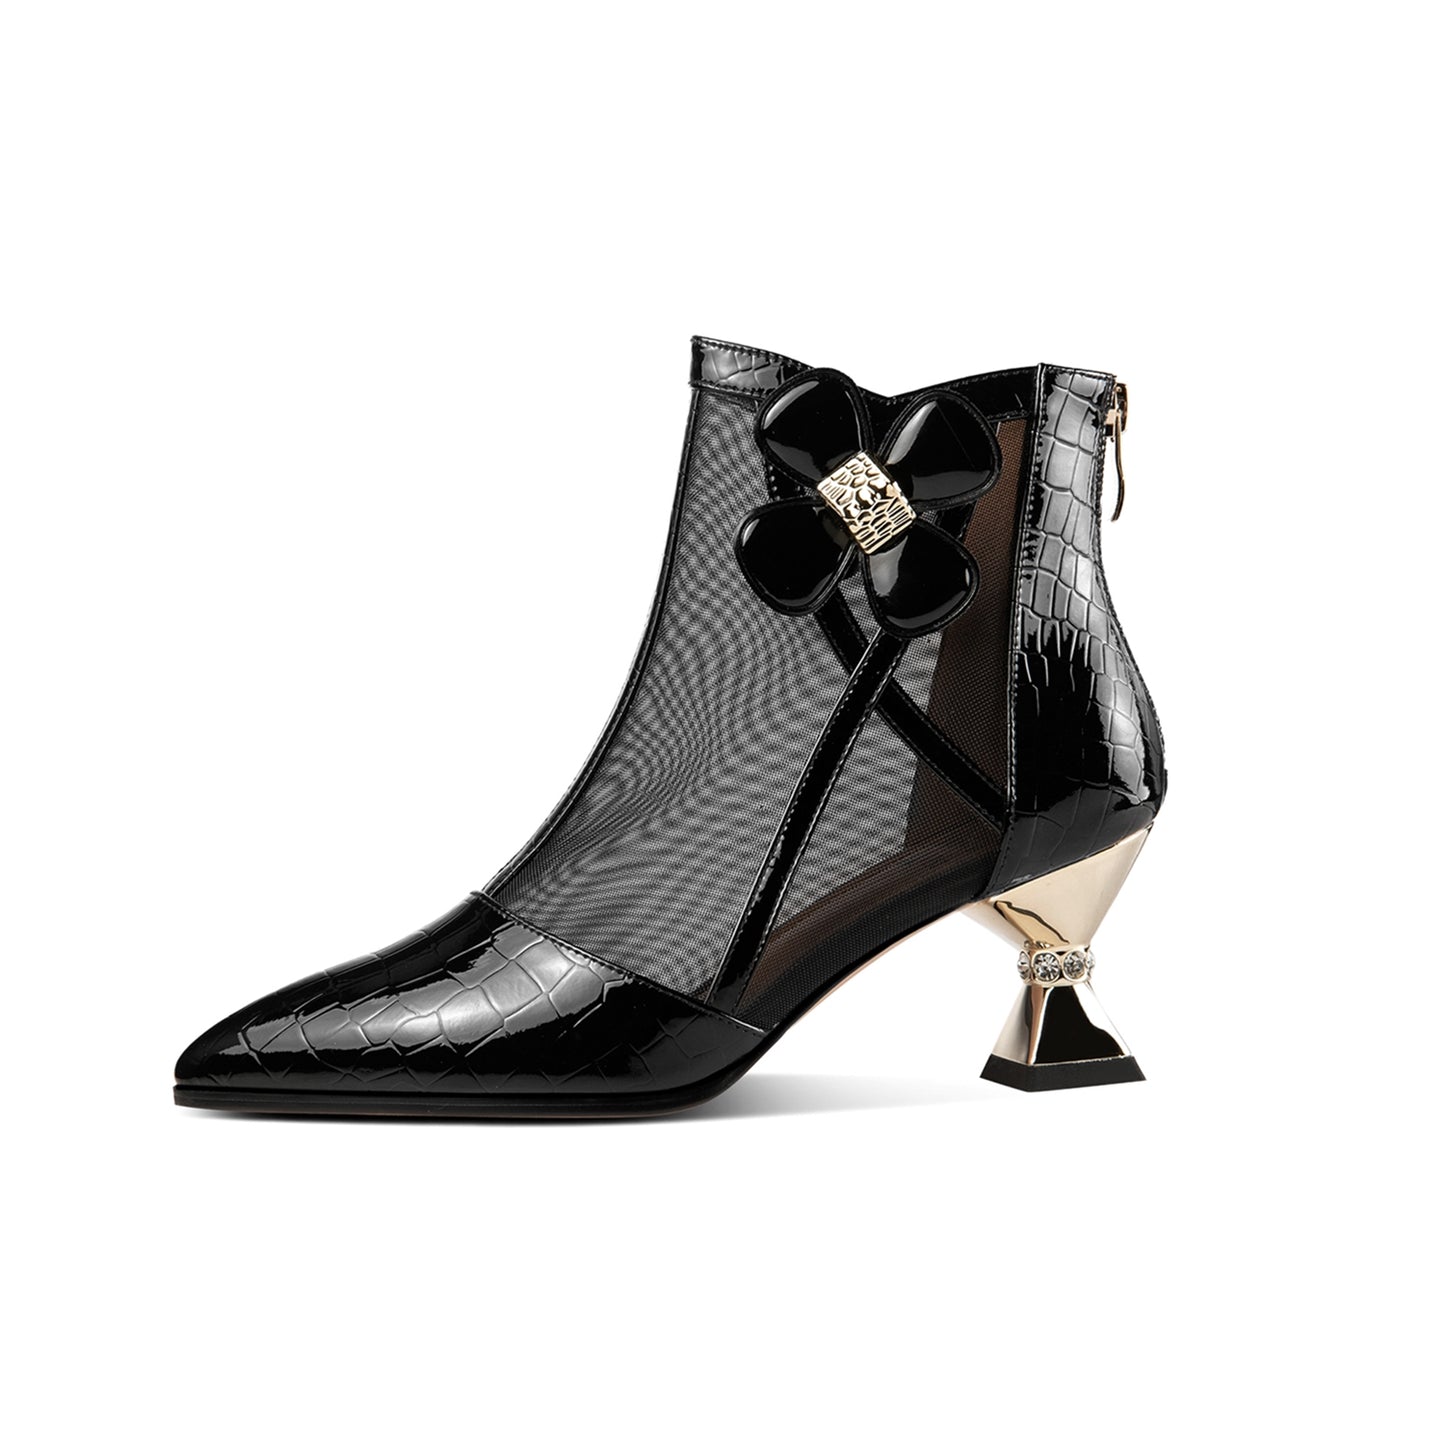 TinaCus Patent Leather & Breathable Mesh Women's Pointed Toe Handmade Flower Mid Heels Zip Up Ankle Boots